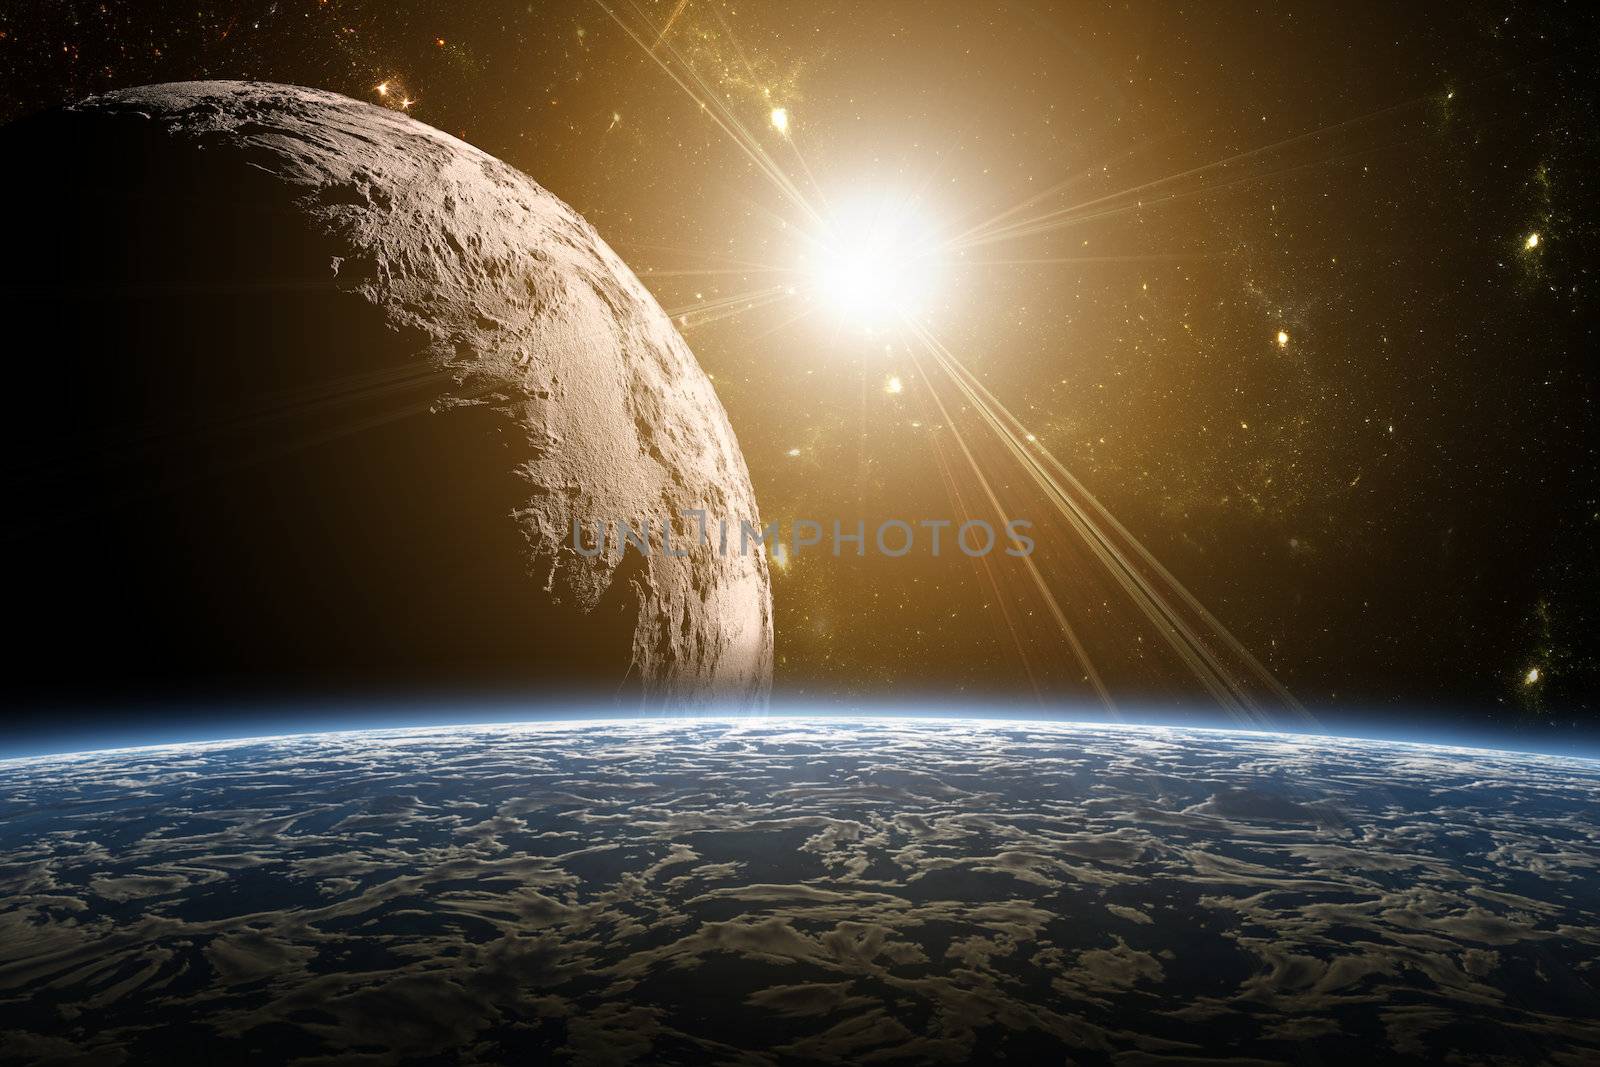 A view of planet earth, moon and sun. Abstract background of dis by mozzyb